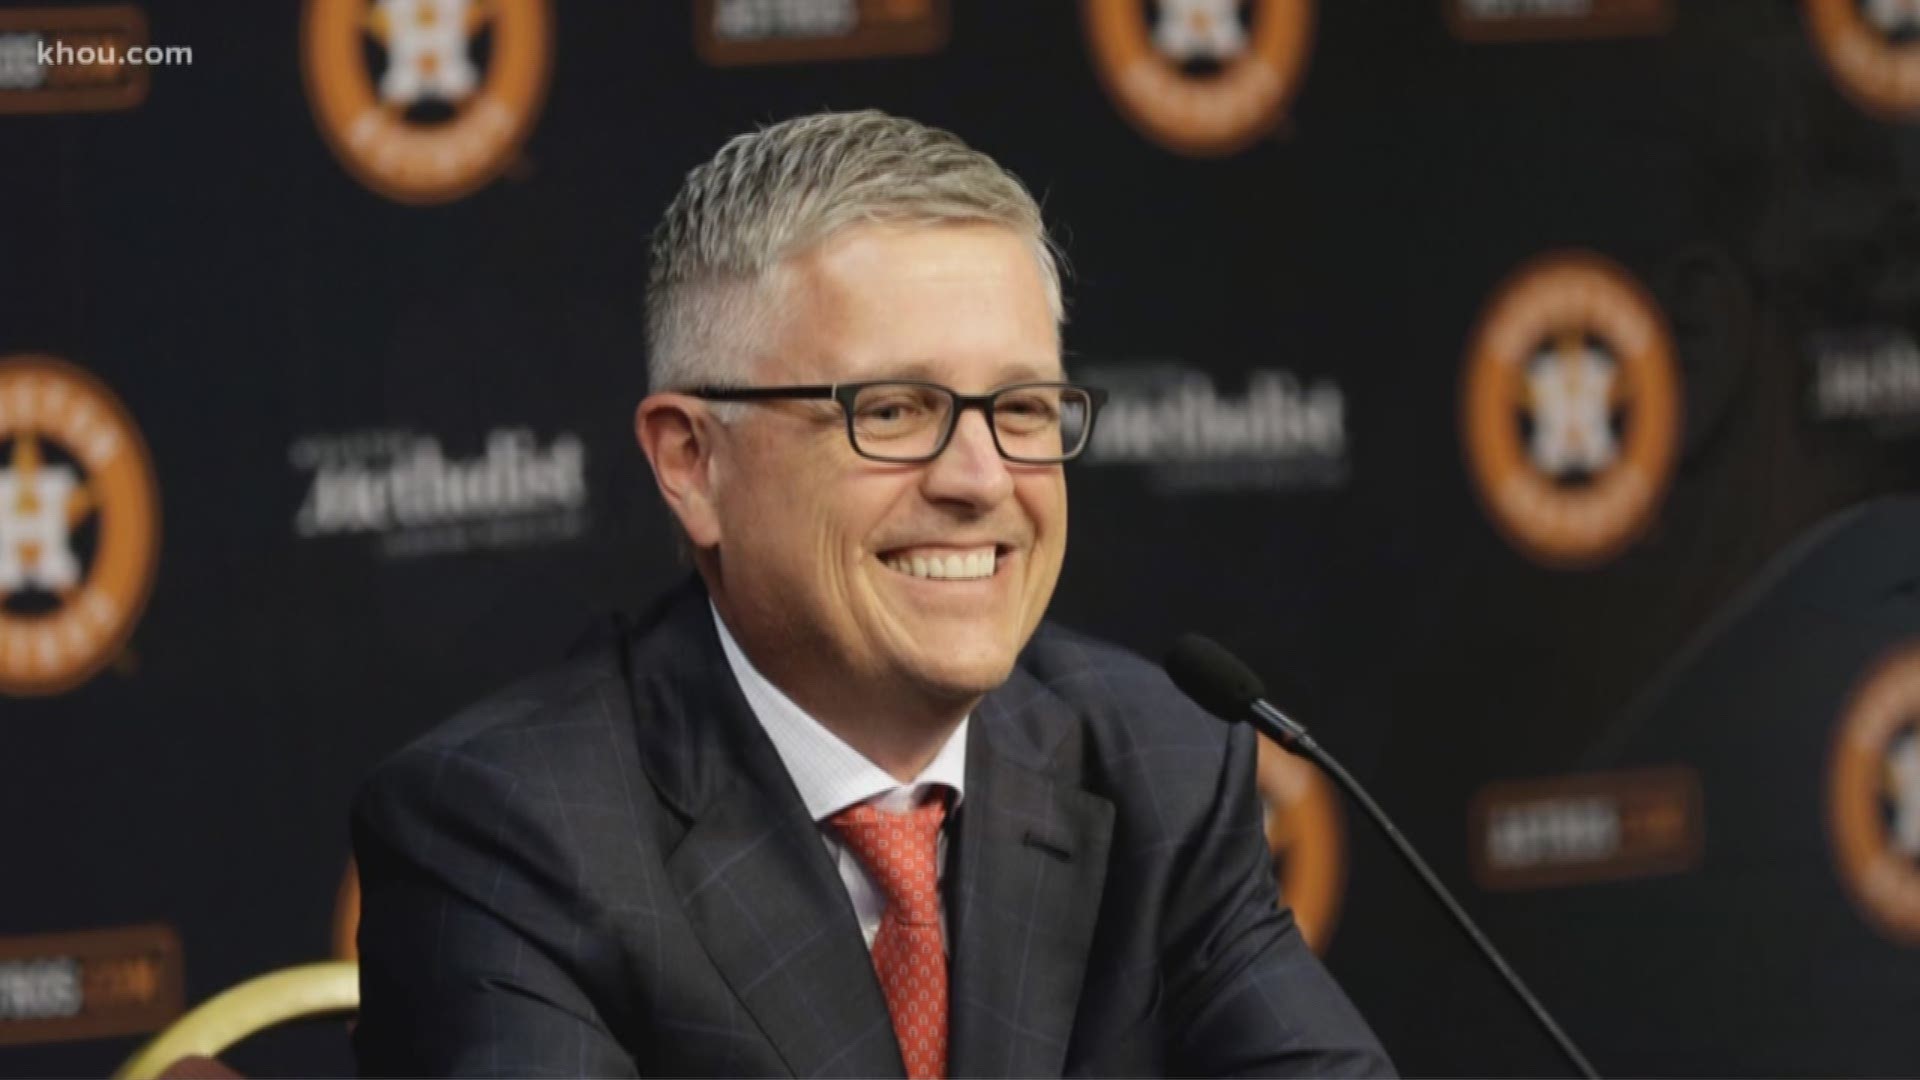 Astros general manager Jeff Luhnow says this team has no weaknesses and if they stay healthy, they're as good as any team he's ever seen. We talked everything trades on this big day for Astros fans.